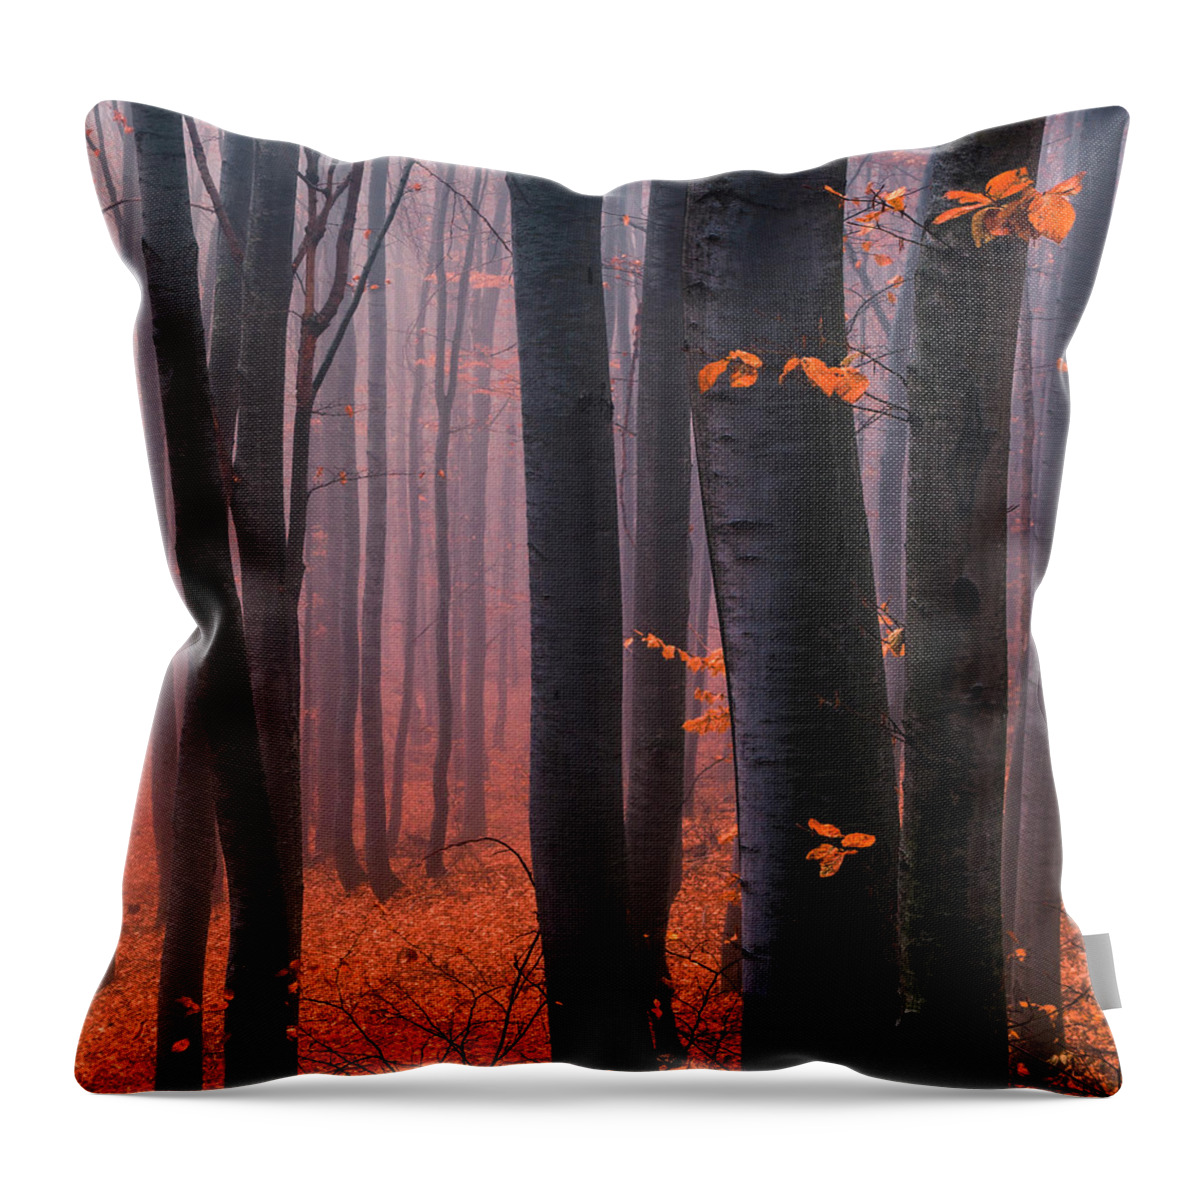 Mountain Throw Pillow featuring the photograph Orange Wood by Evgeni Dinev